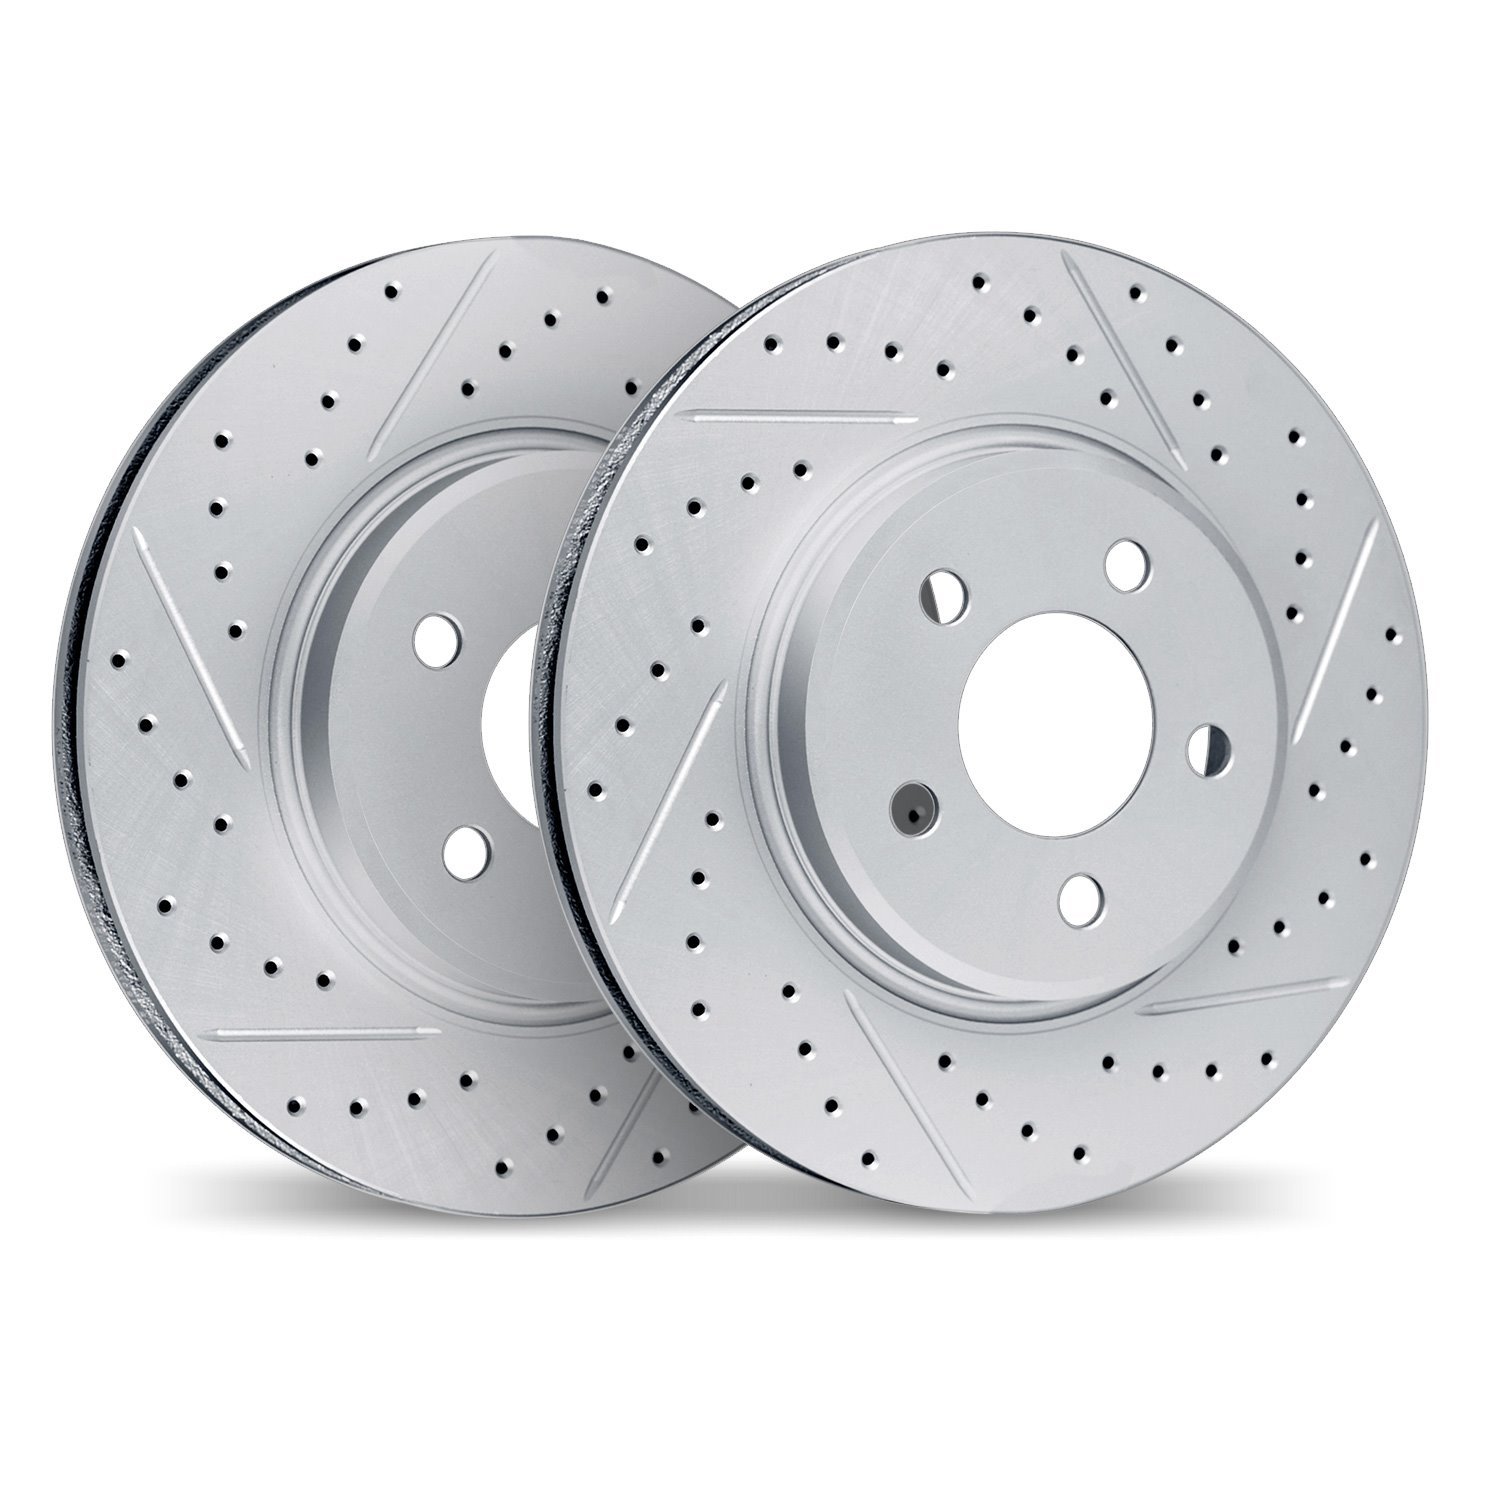 2002-75014 Geoperformance Drilled/Slotted Brake Rotors, Fits Select Lexus/Toyota/Scion, Position: Front